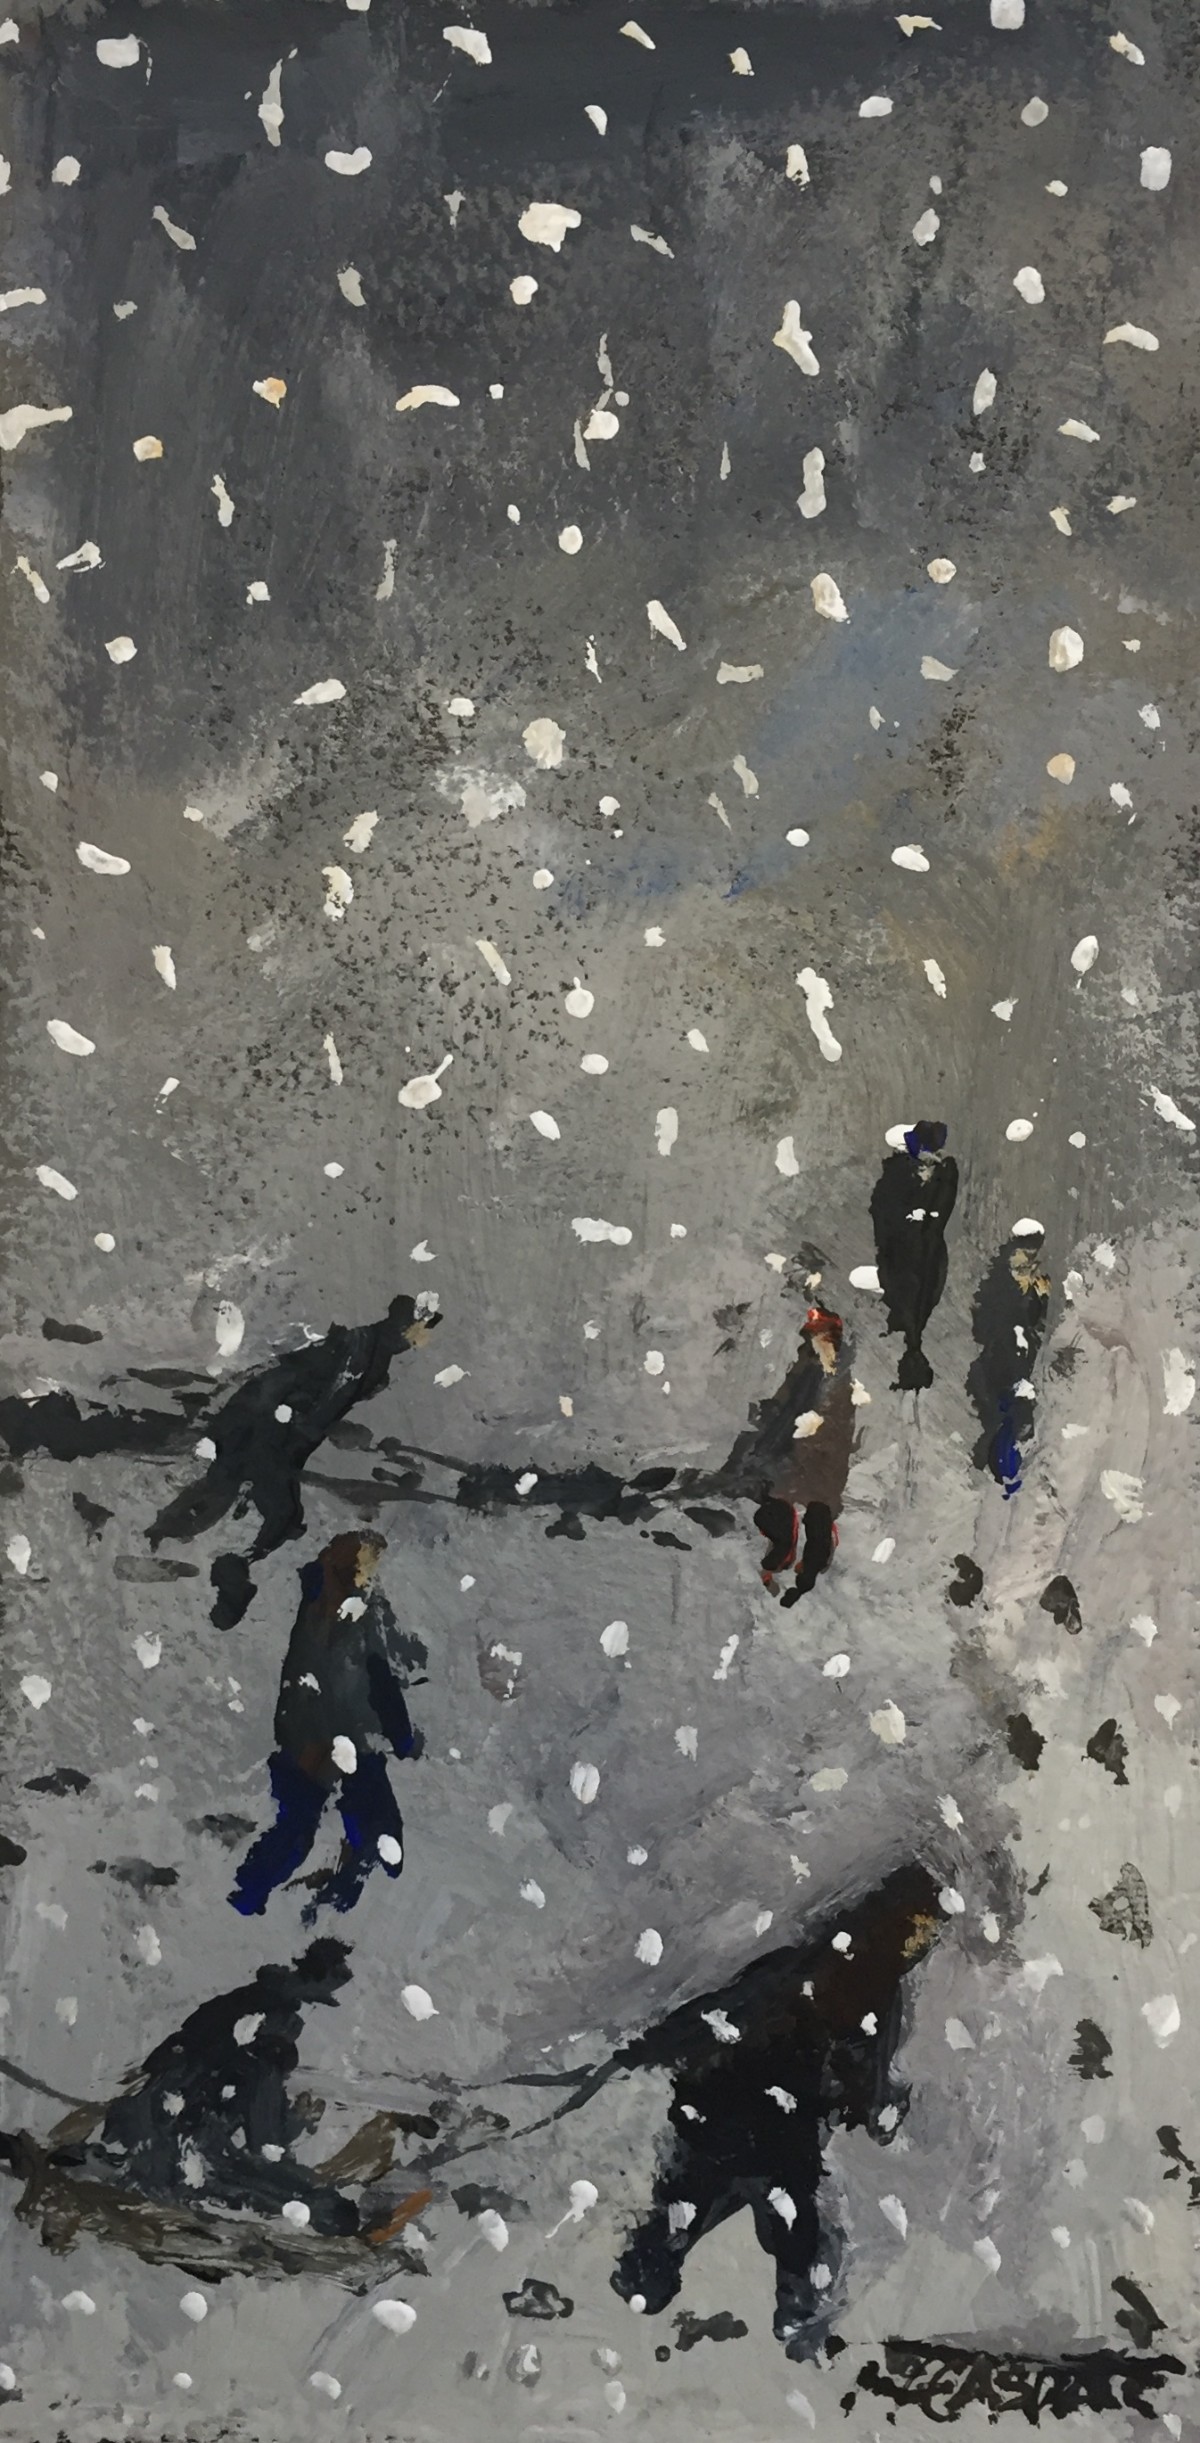 Caught in a Blizzard by Malcolm Teasdale